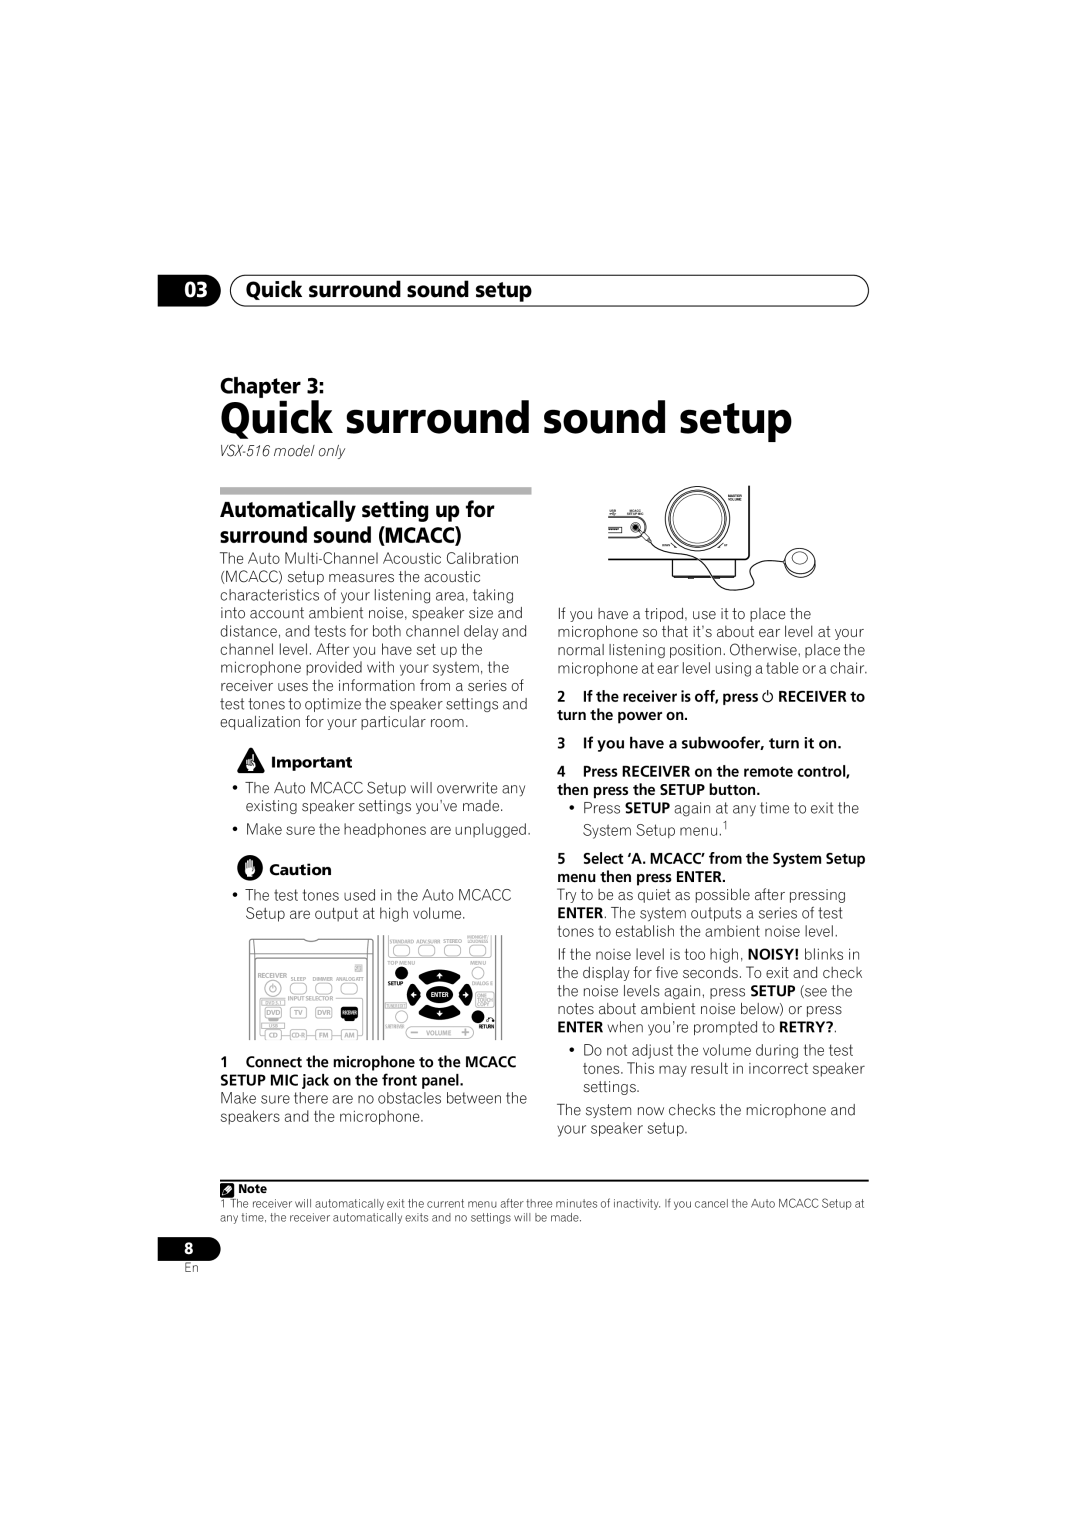 Pioneer VSX-416-K, VSX-516-K 03Quick surround sound setup Chapter, Automatically setting up for surround sound MCACC 